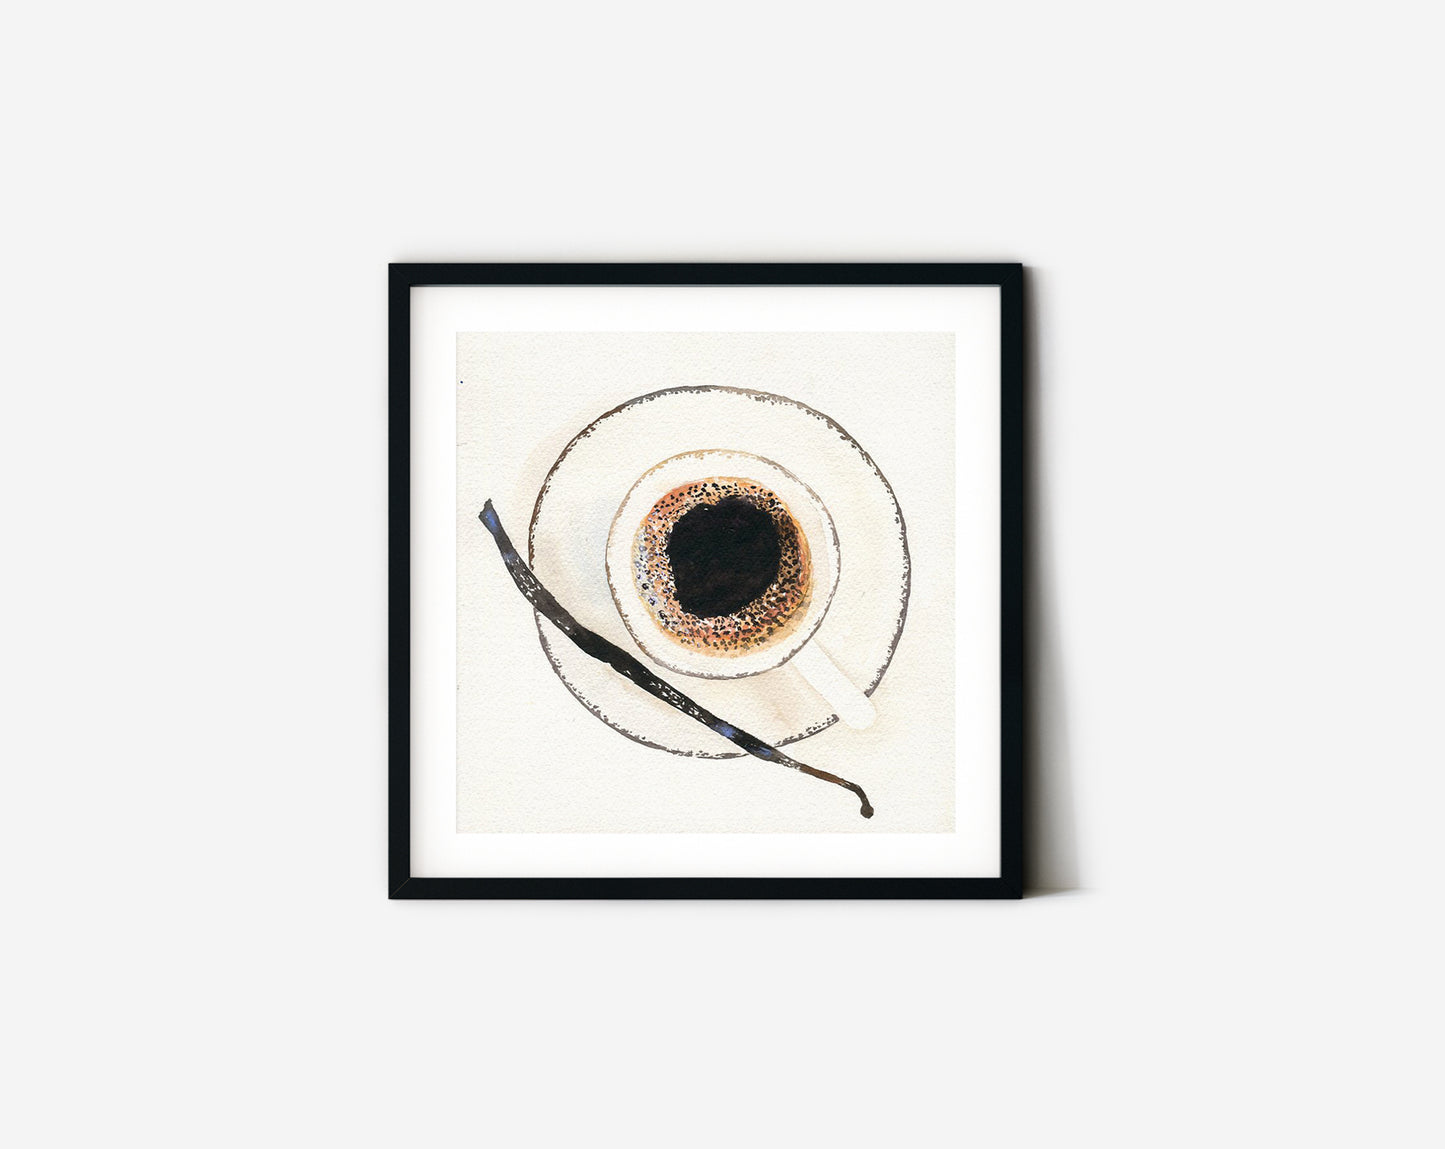 Coffee cup from above with vanilla stick